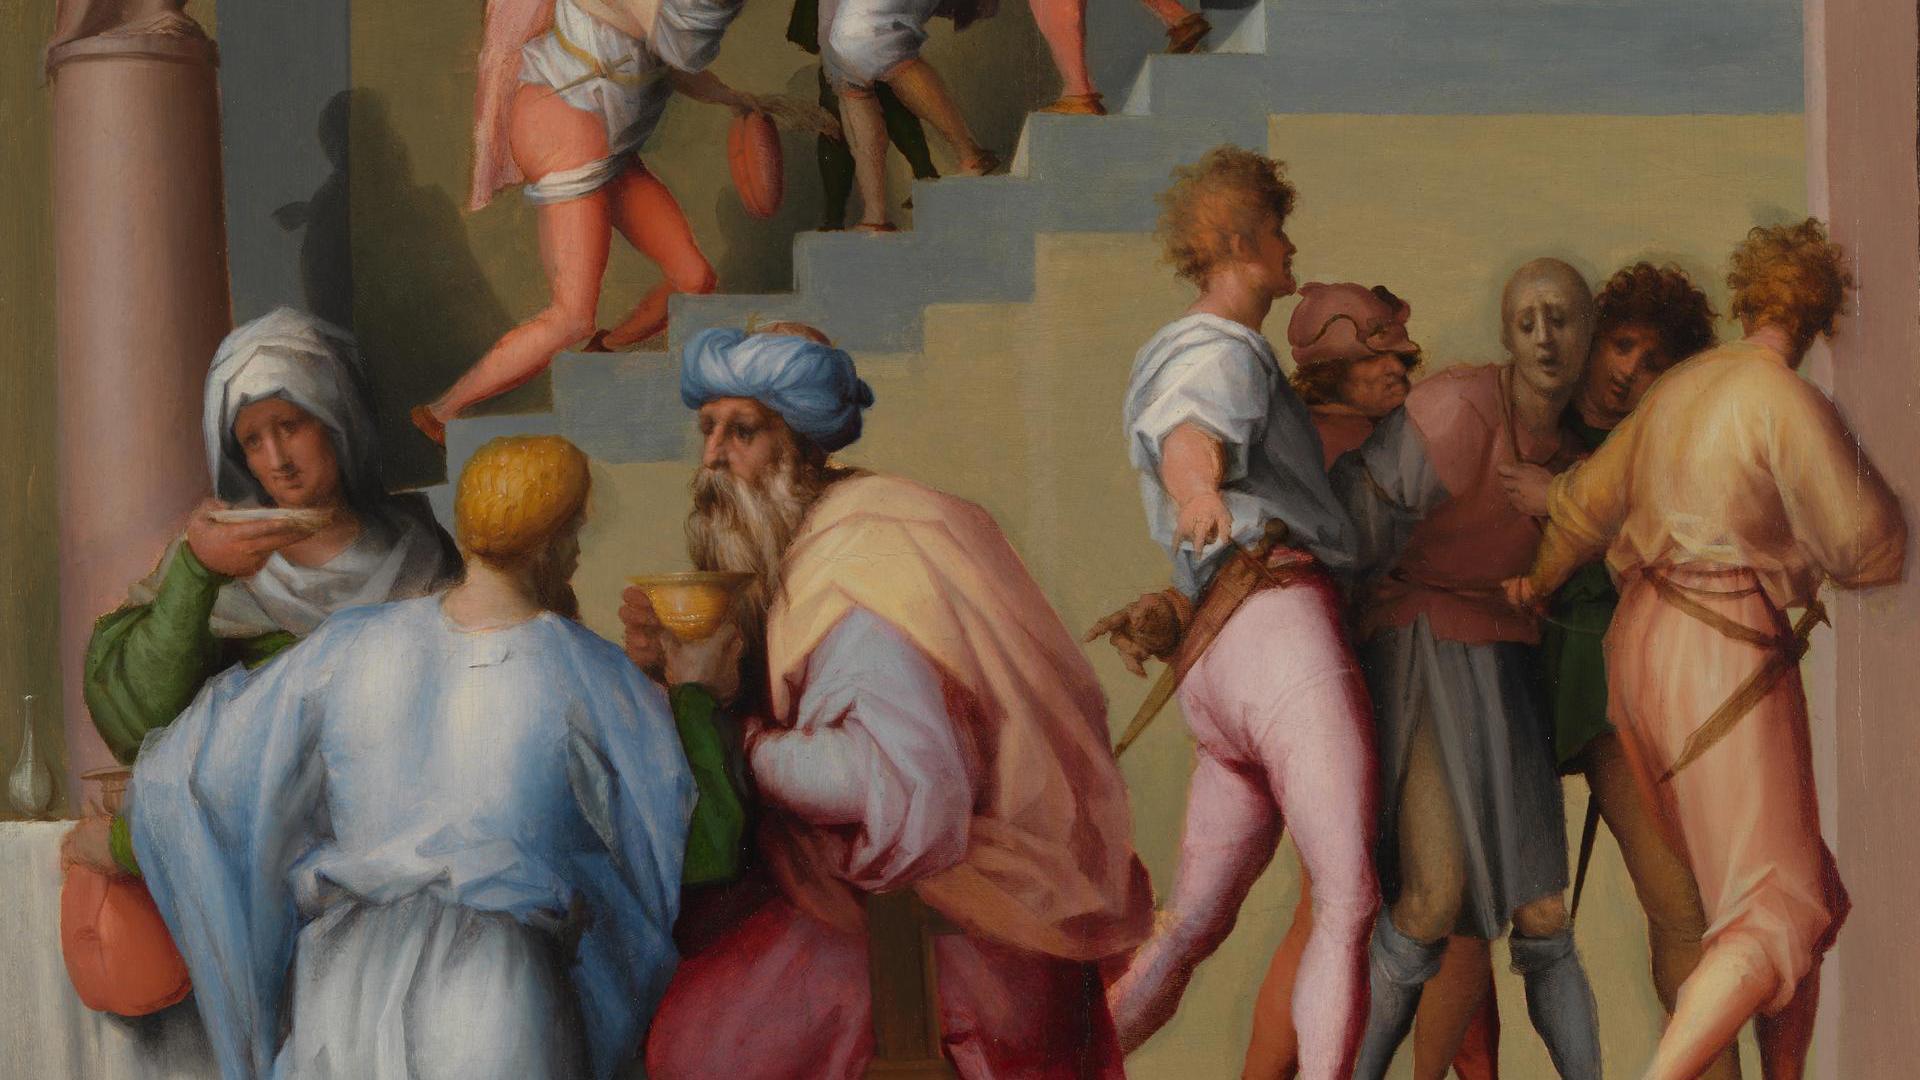 Pharaoh with his Butler and Baker by Pontormo